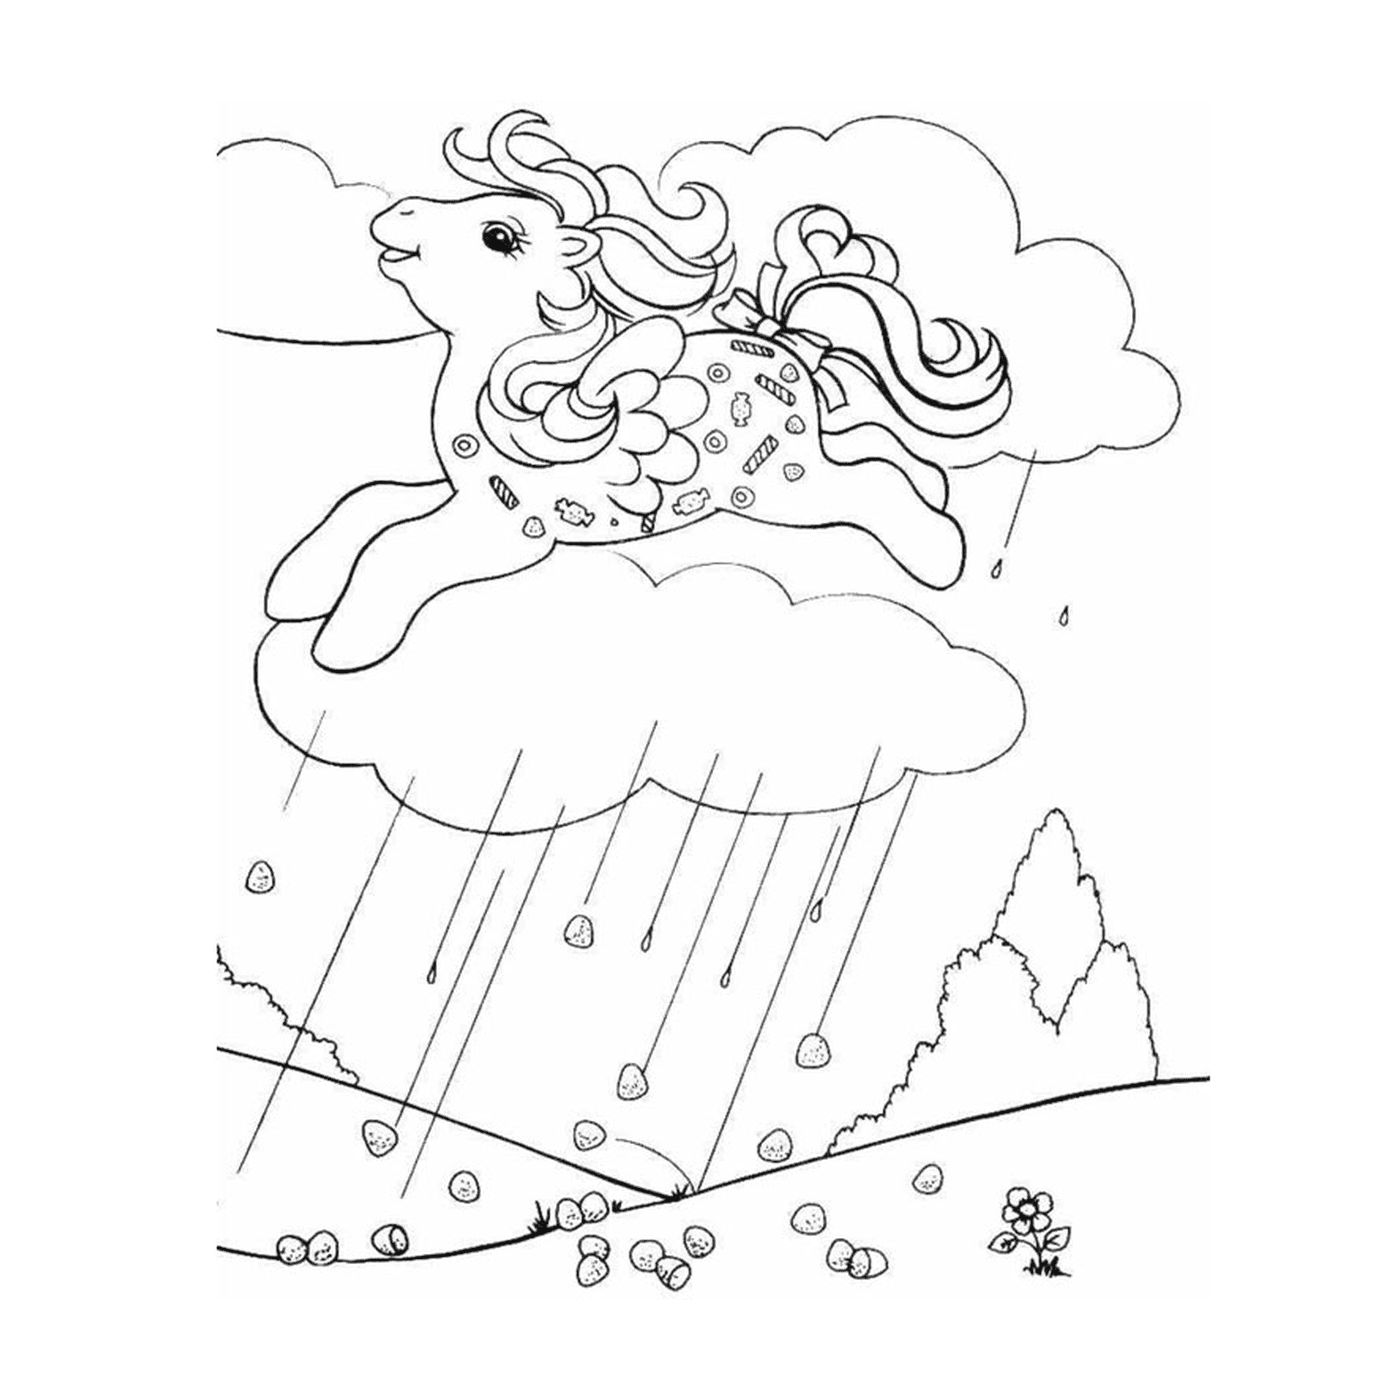  flying pony over cloud 